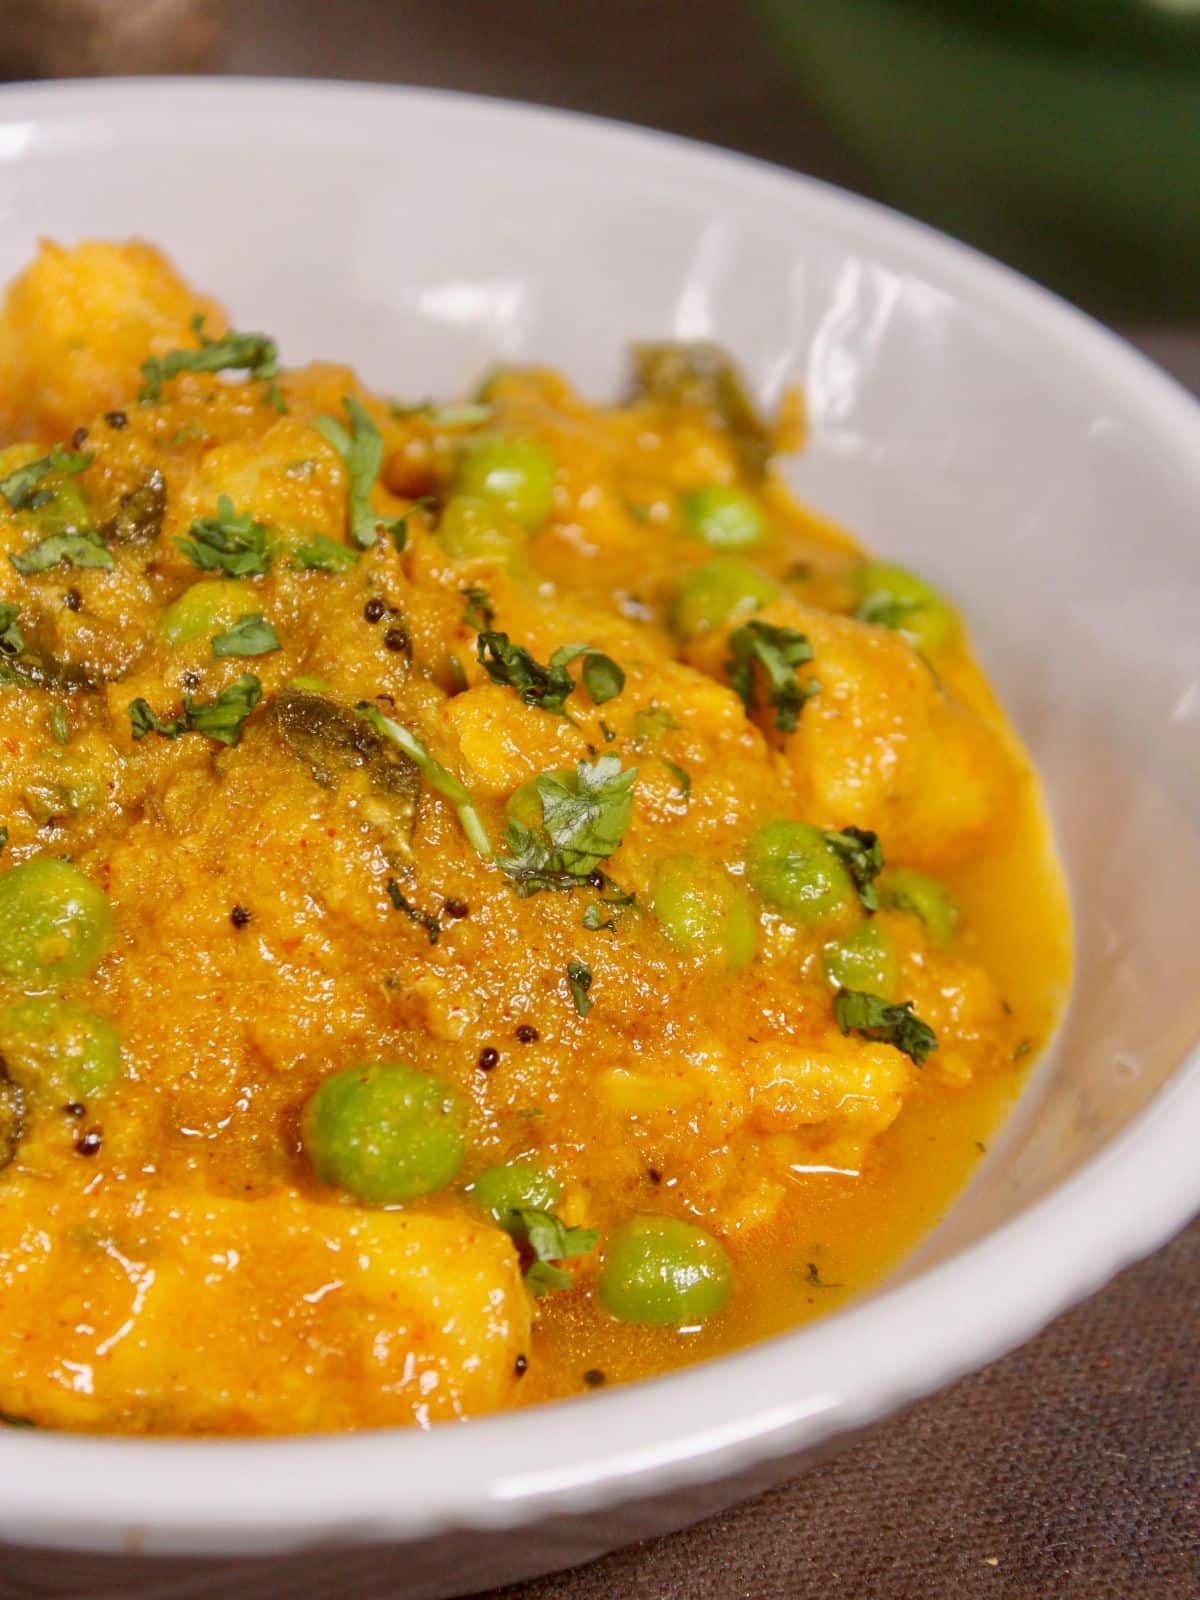 yummy yam curry with green peas